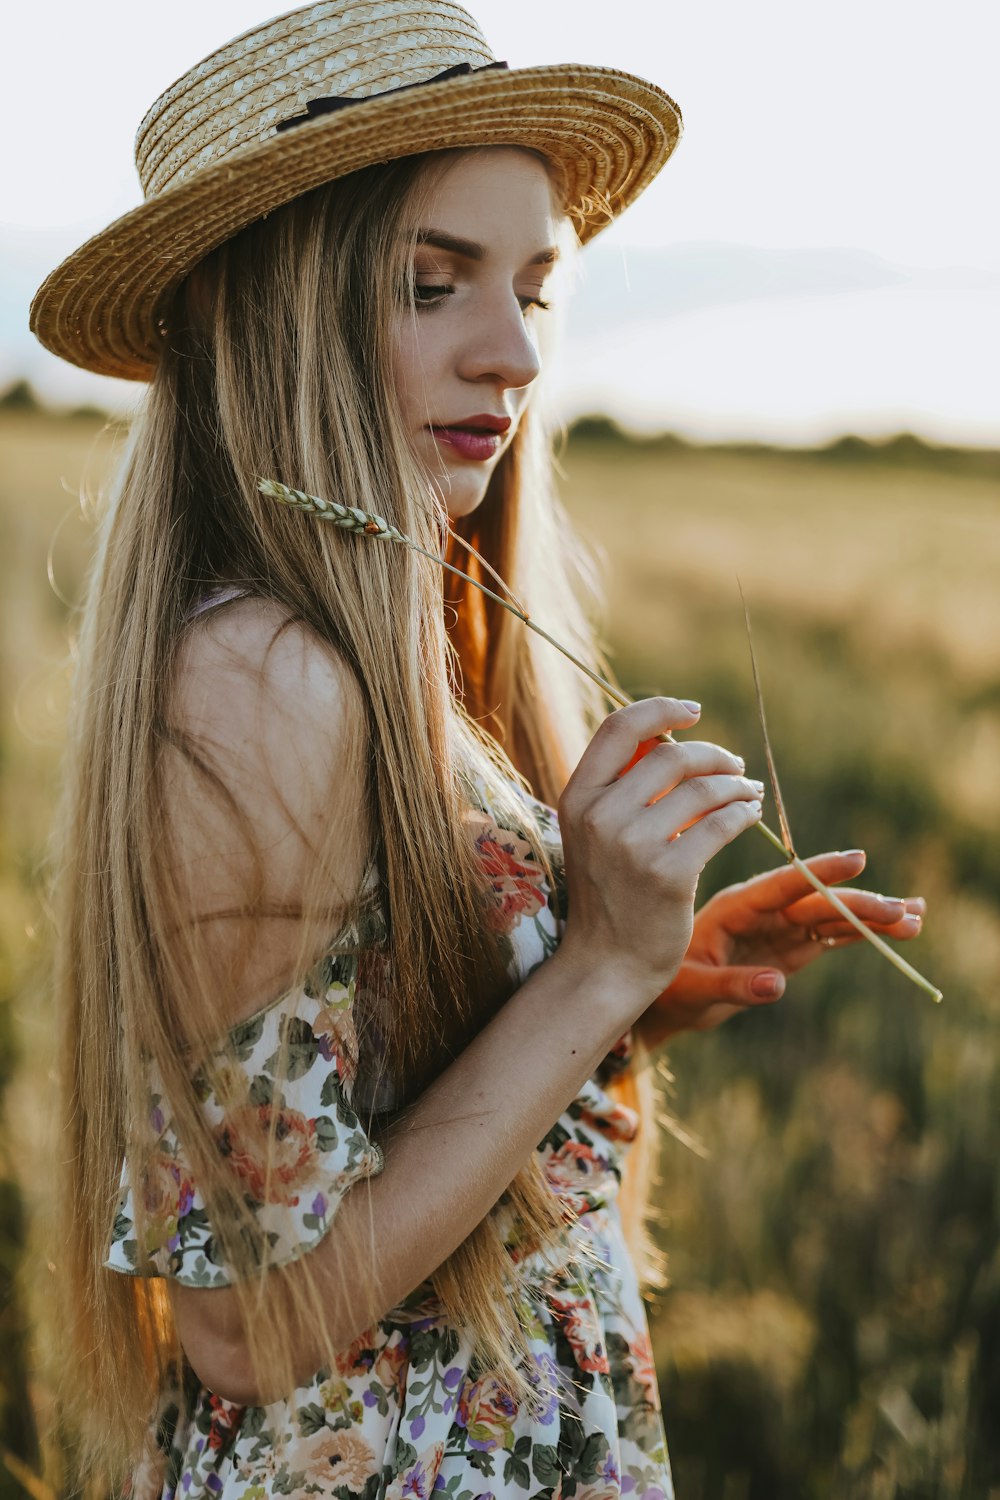 a person wearing a straw hat